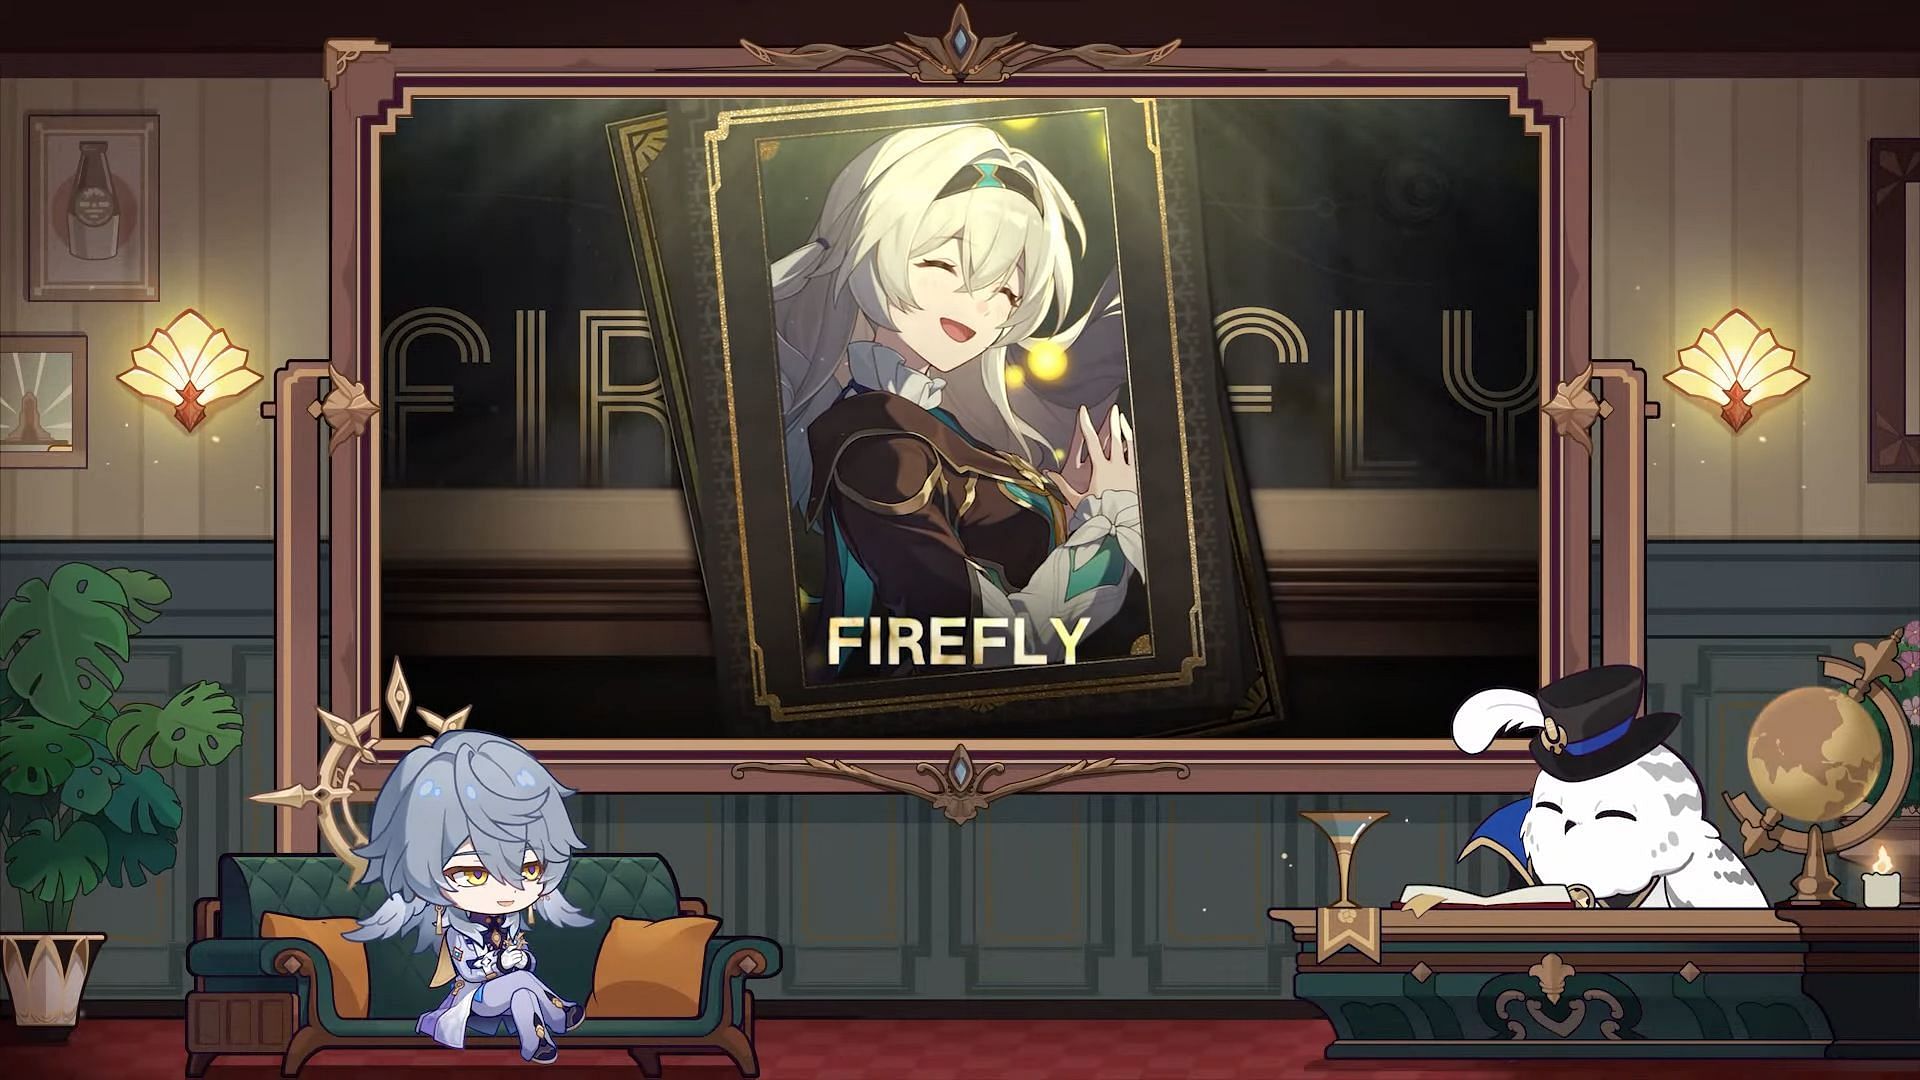 Firefly as depicted in the livestream